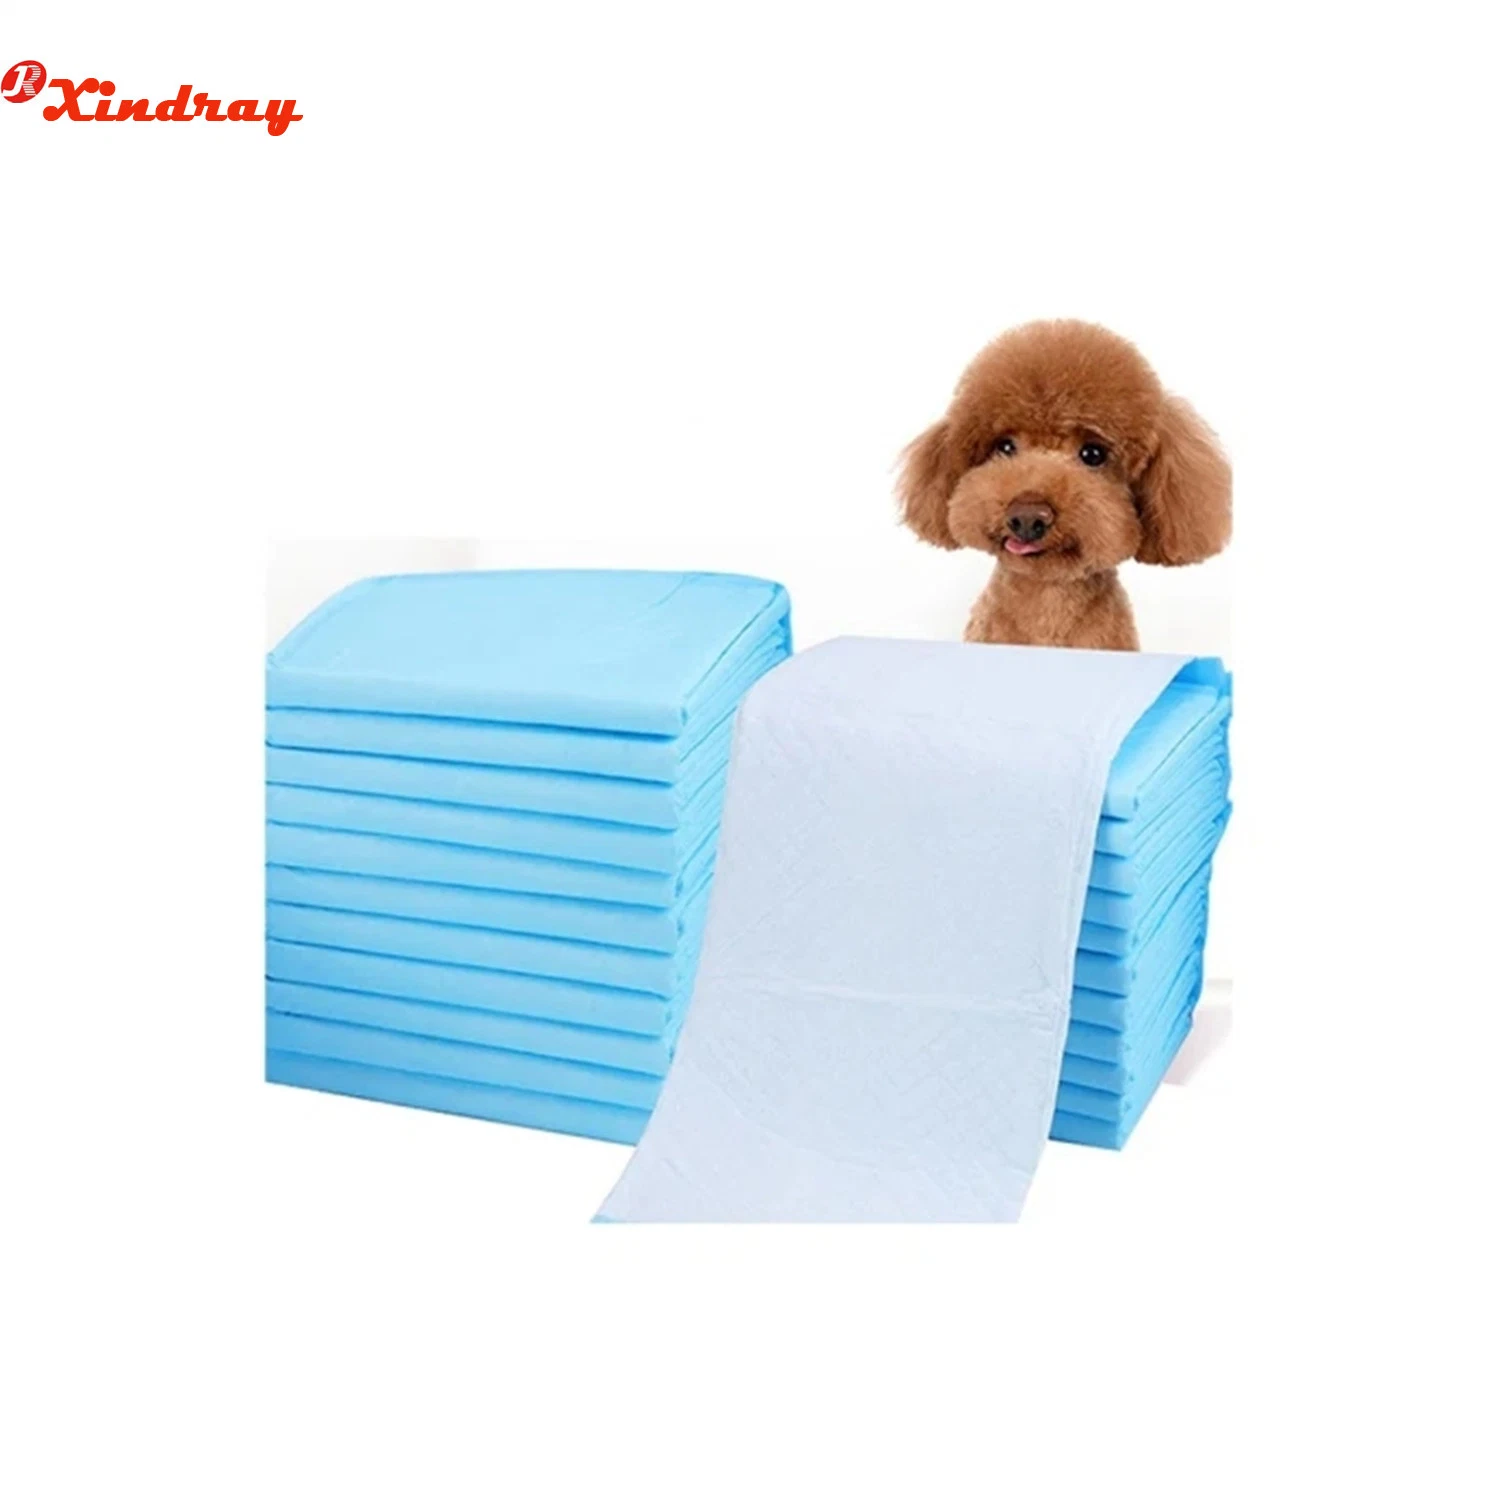 USA Outdoor Pet Dog Cat Disposable Diapers Wrap Paper Tissue Male Female Manner Belt Male Female Cat Diaper